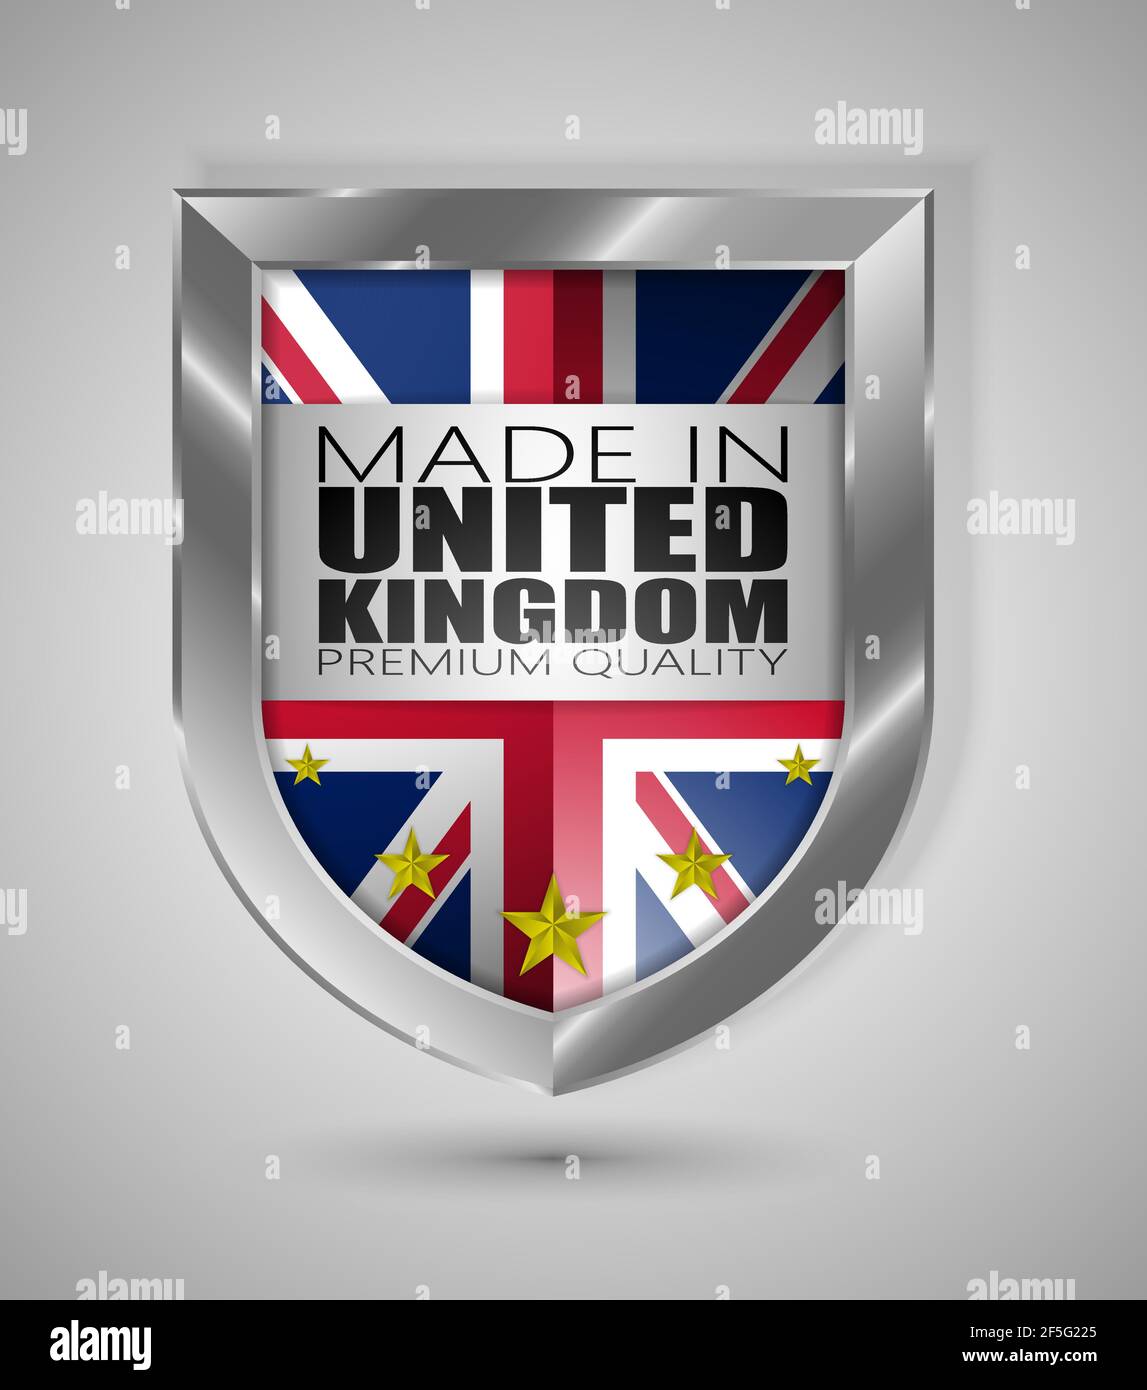 EPS10 Vector illustration. Realistic shield. Made in United Kingdom, Premium Quality. Perfect for any use. Stock Vector